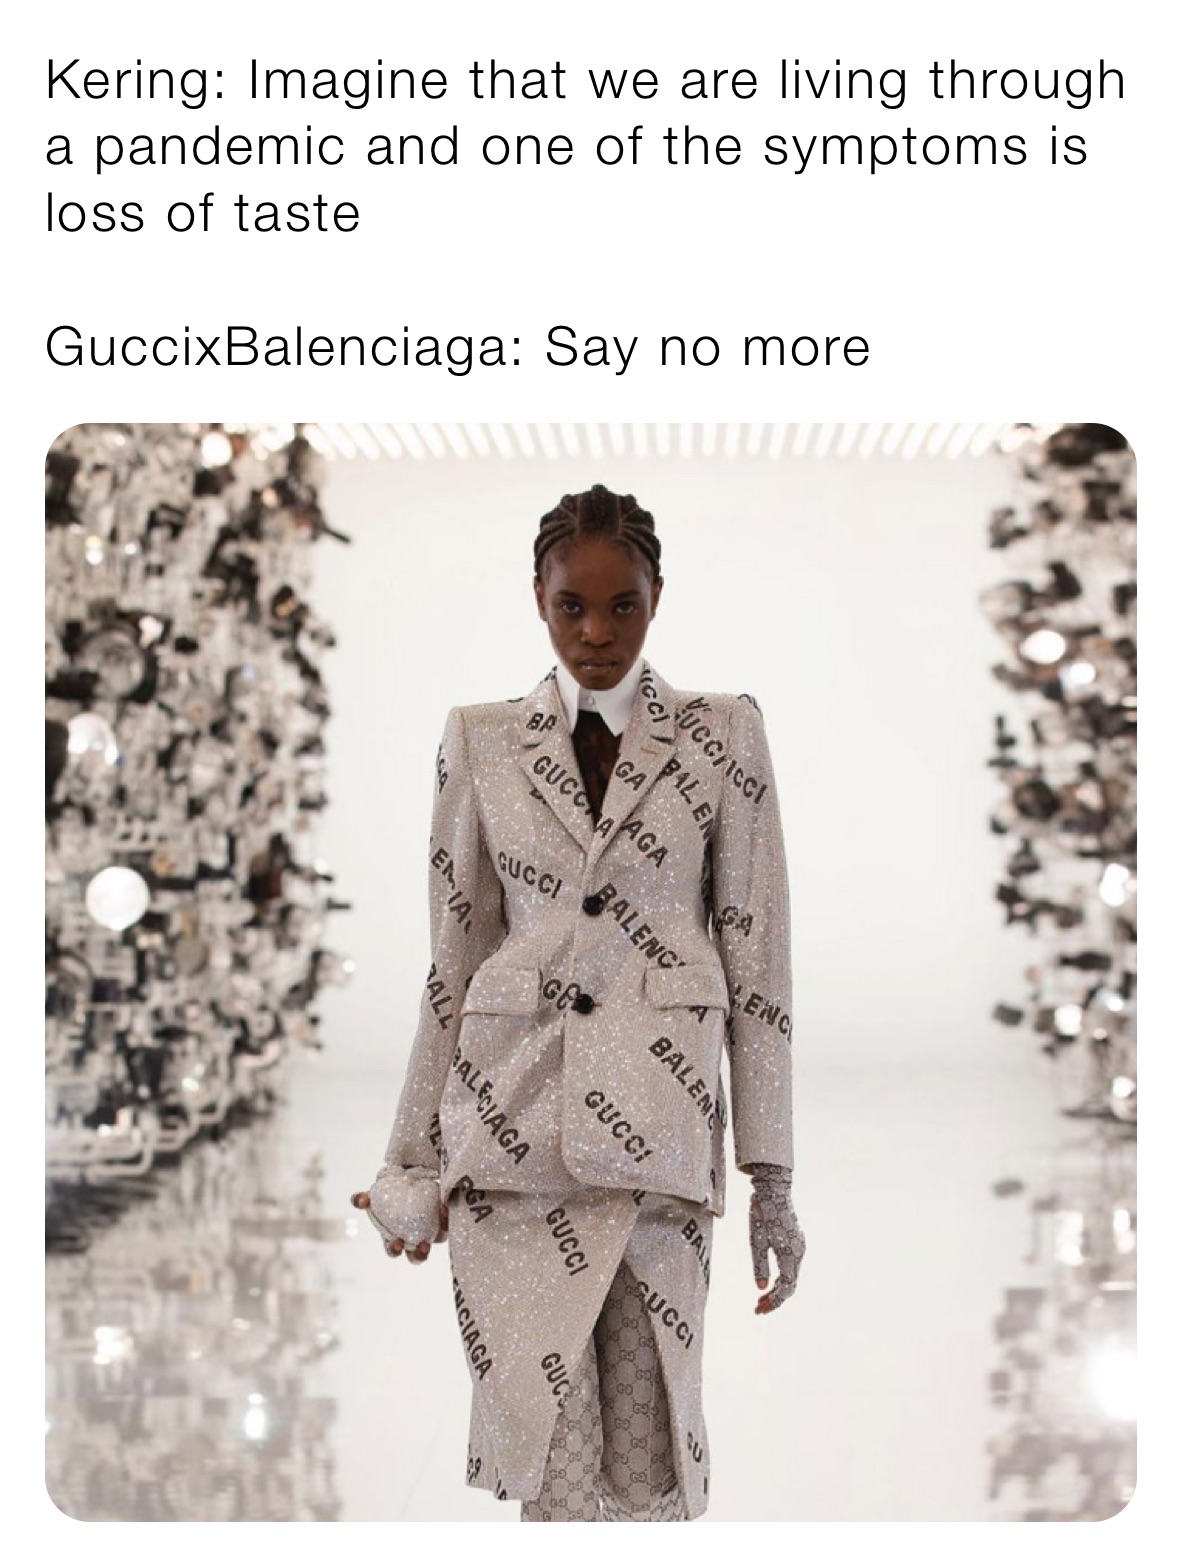 Kering: Imagine that we are living through a pandemic and one of the symptoms is loss of taste

GuccixBalenciaga: Say no more 